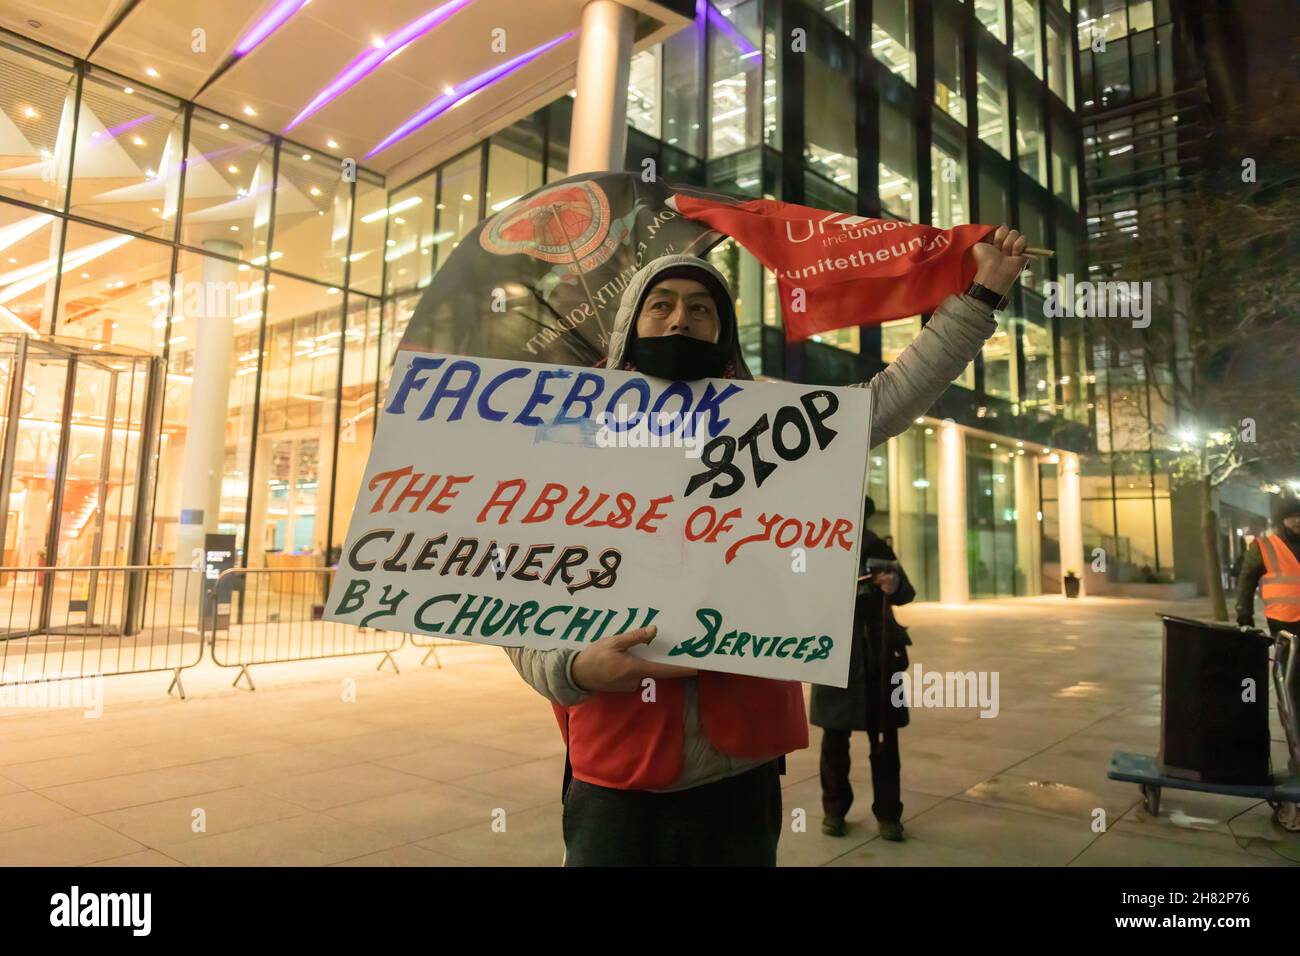 A protestor is seen holding a placard that says 'Facebook, stop the abuse of your cleaners by Churchill services' during a protest outside Facebook headquarters at Warren Street in London.The group of protesters led by the Independent Workers Union protested at the Facebook London office after it increased workload without a salary increase. Jones Lang LaSalle (JLL) has outsourced the cleaning obligations to Churchill Services to clean the office of Facebook. Also, they allegedly mistreated the cleaners which resulted in the protest. (Photo by Belinda Jiao/SOPA Images/Sipa USA) Stock Photo